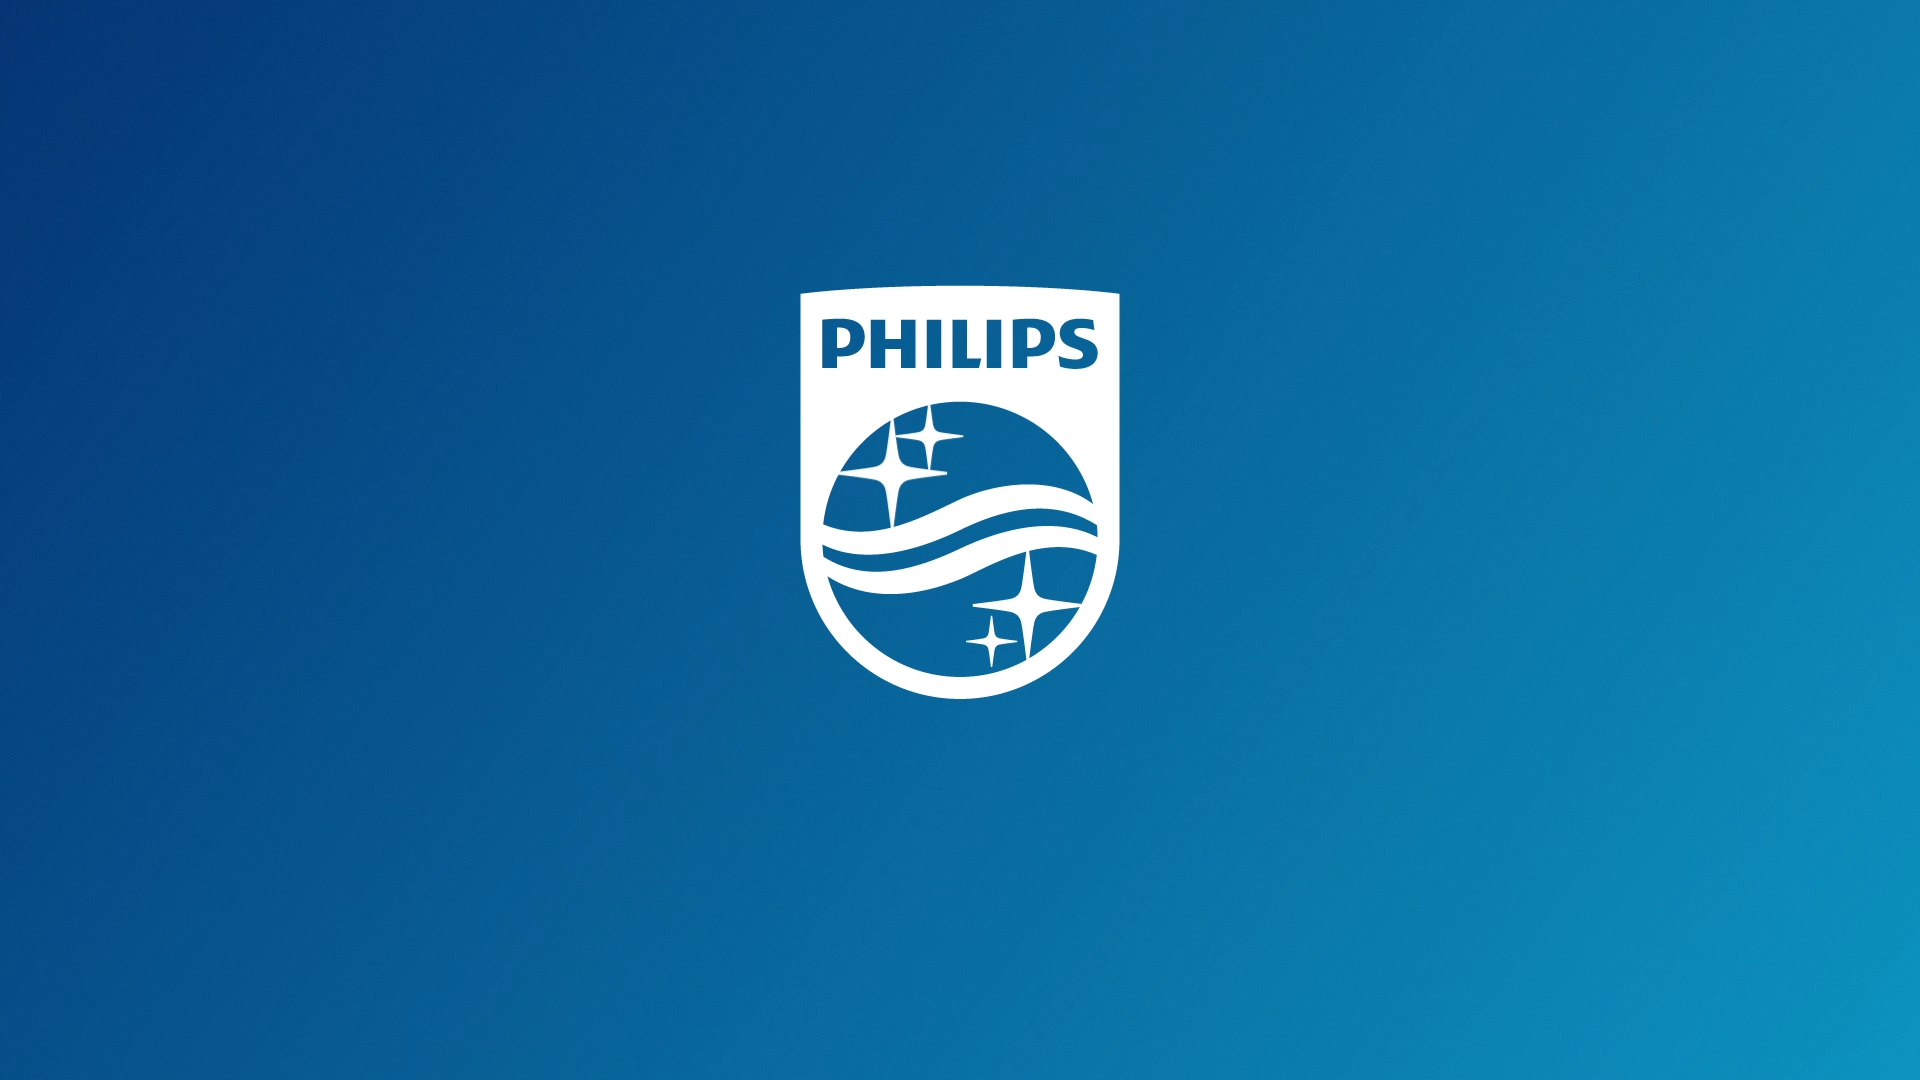 Philips symbol Download in HD Quality